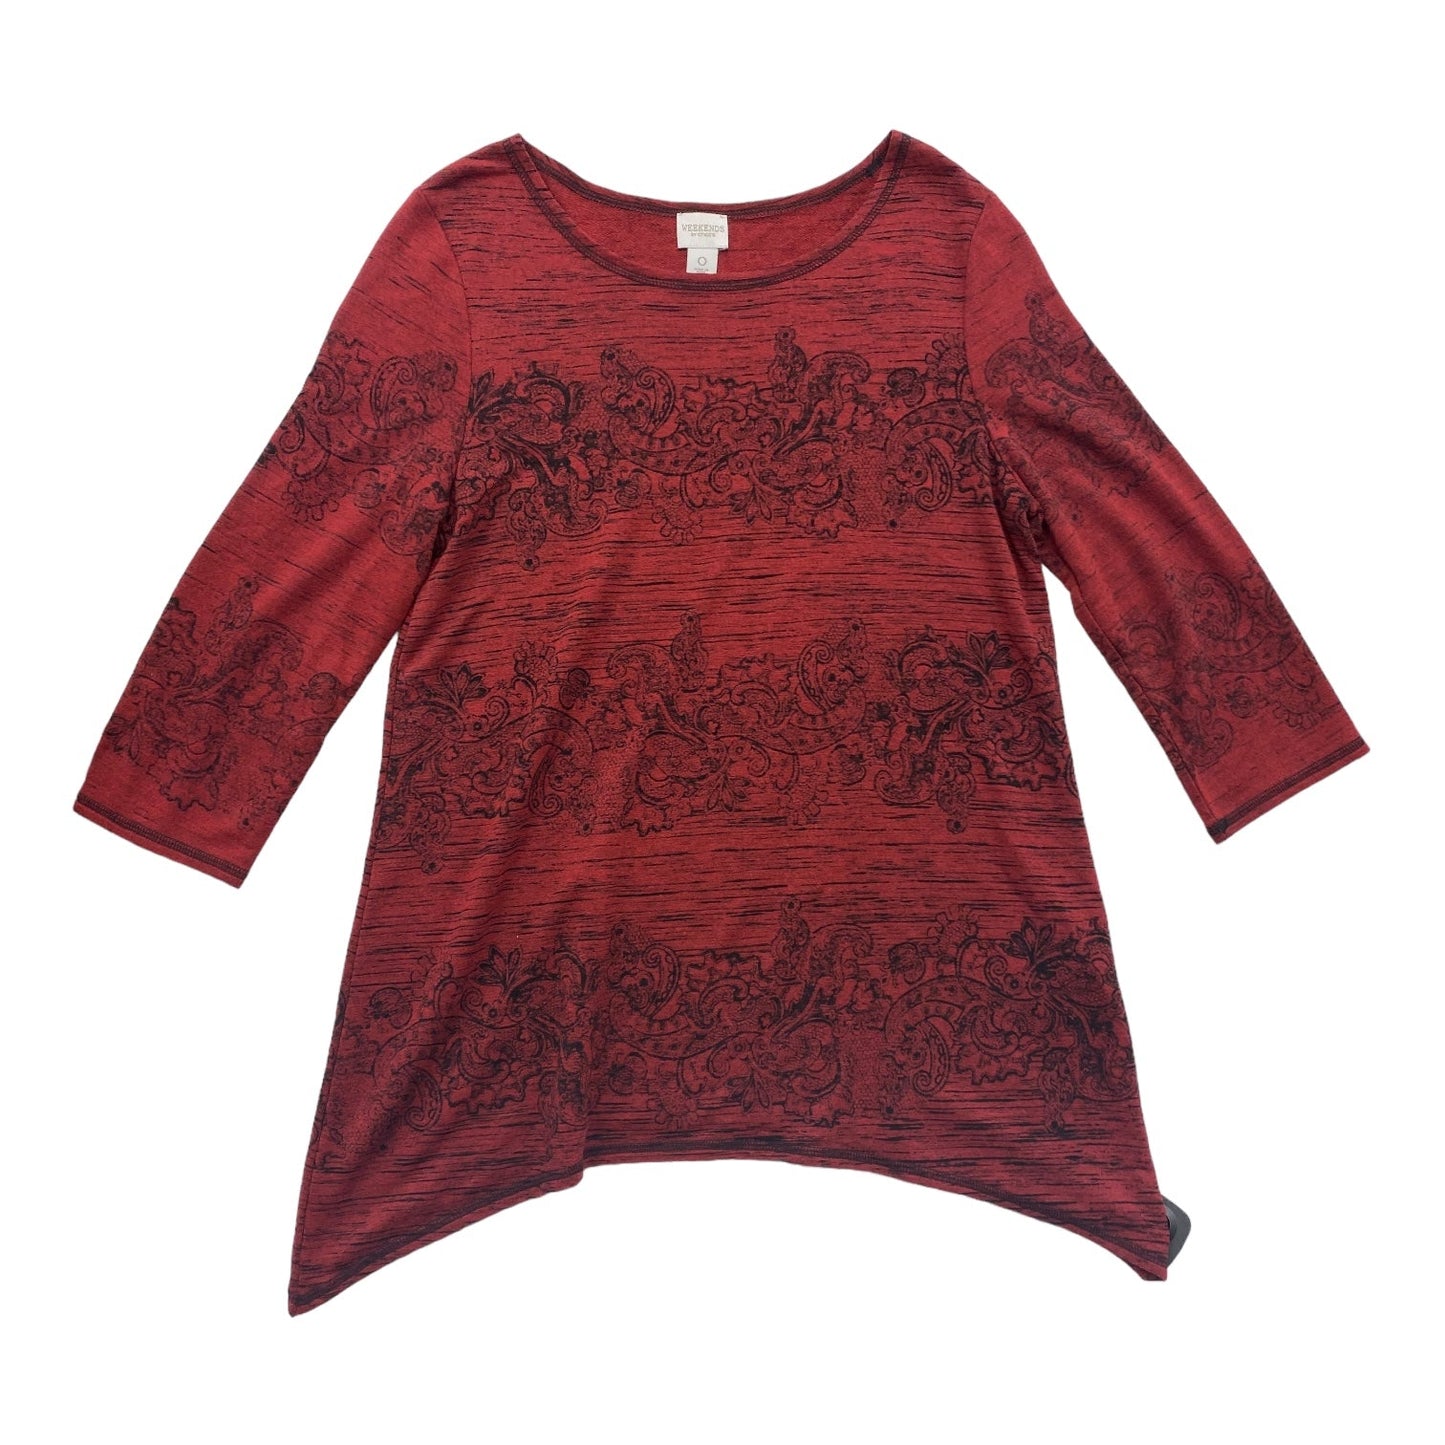 Black & Red Top Long Sleeve Chicos, Size S